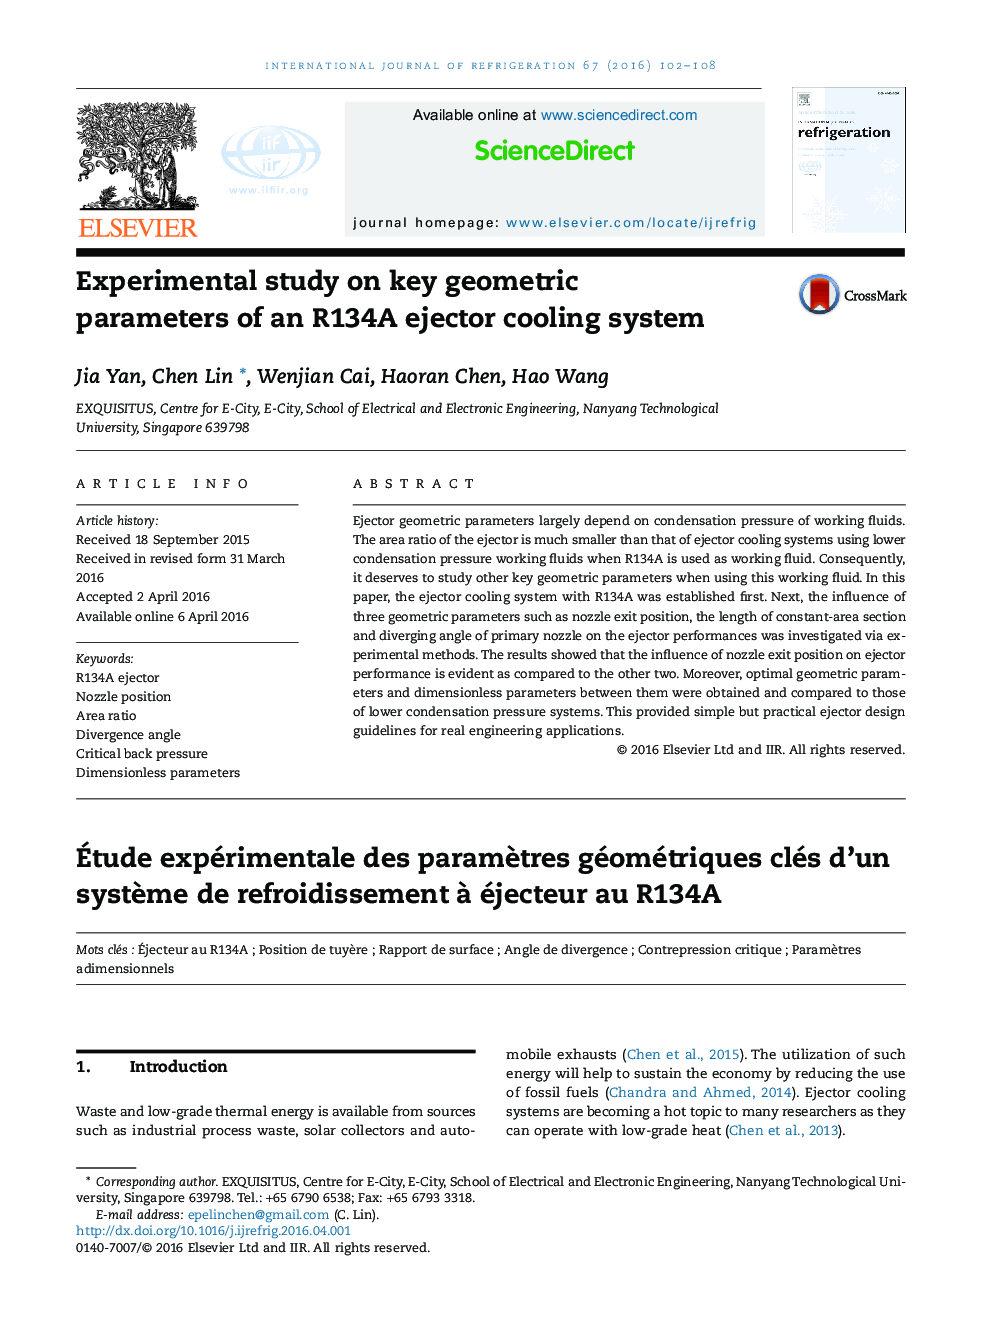 Experimental study on key geometric parameters of an R134A ejector cooling system